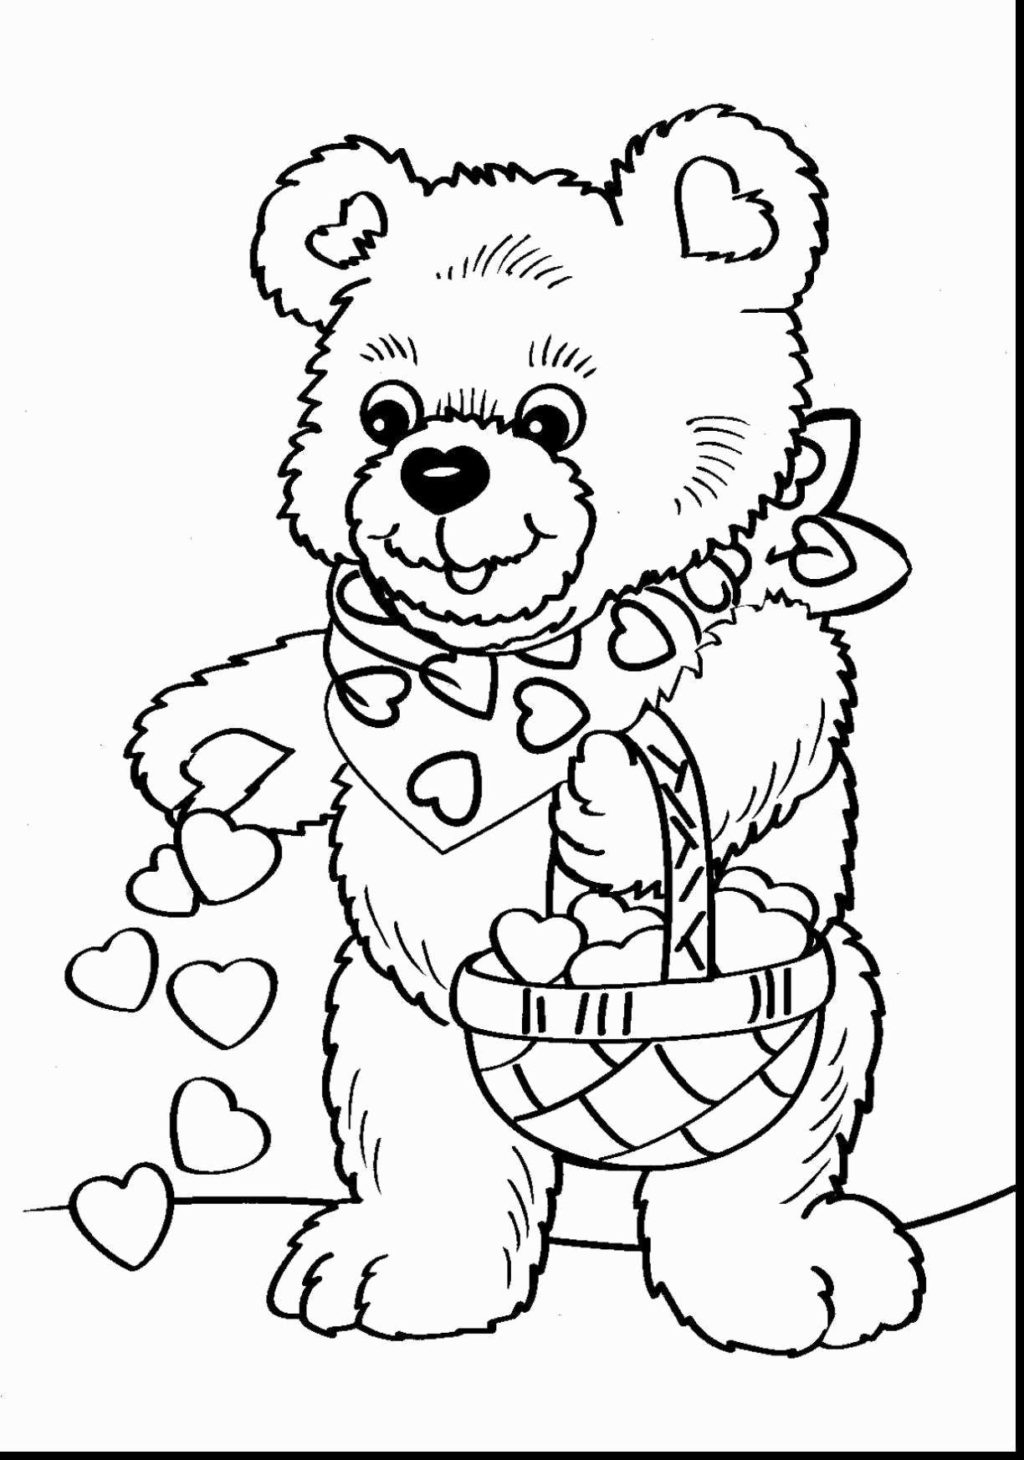 Valentine Teddy Bear Coloring Pages Coloring Book World Teddy Bear Coloring Pages For Adults Princess